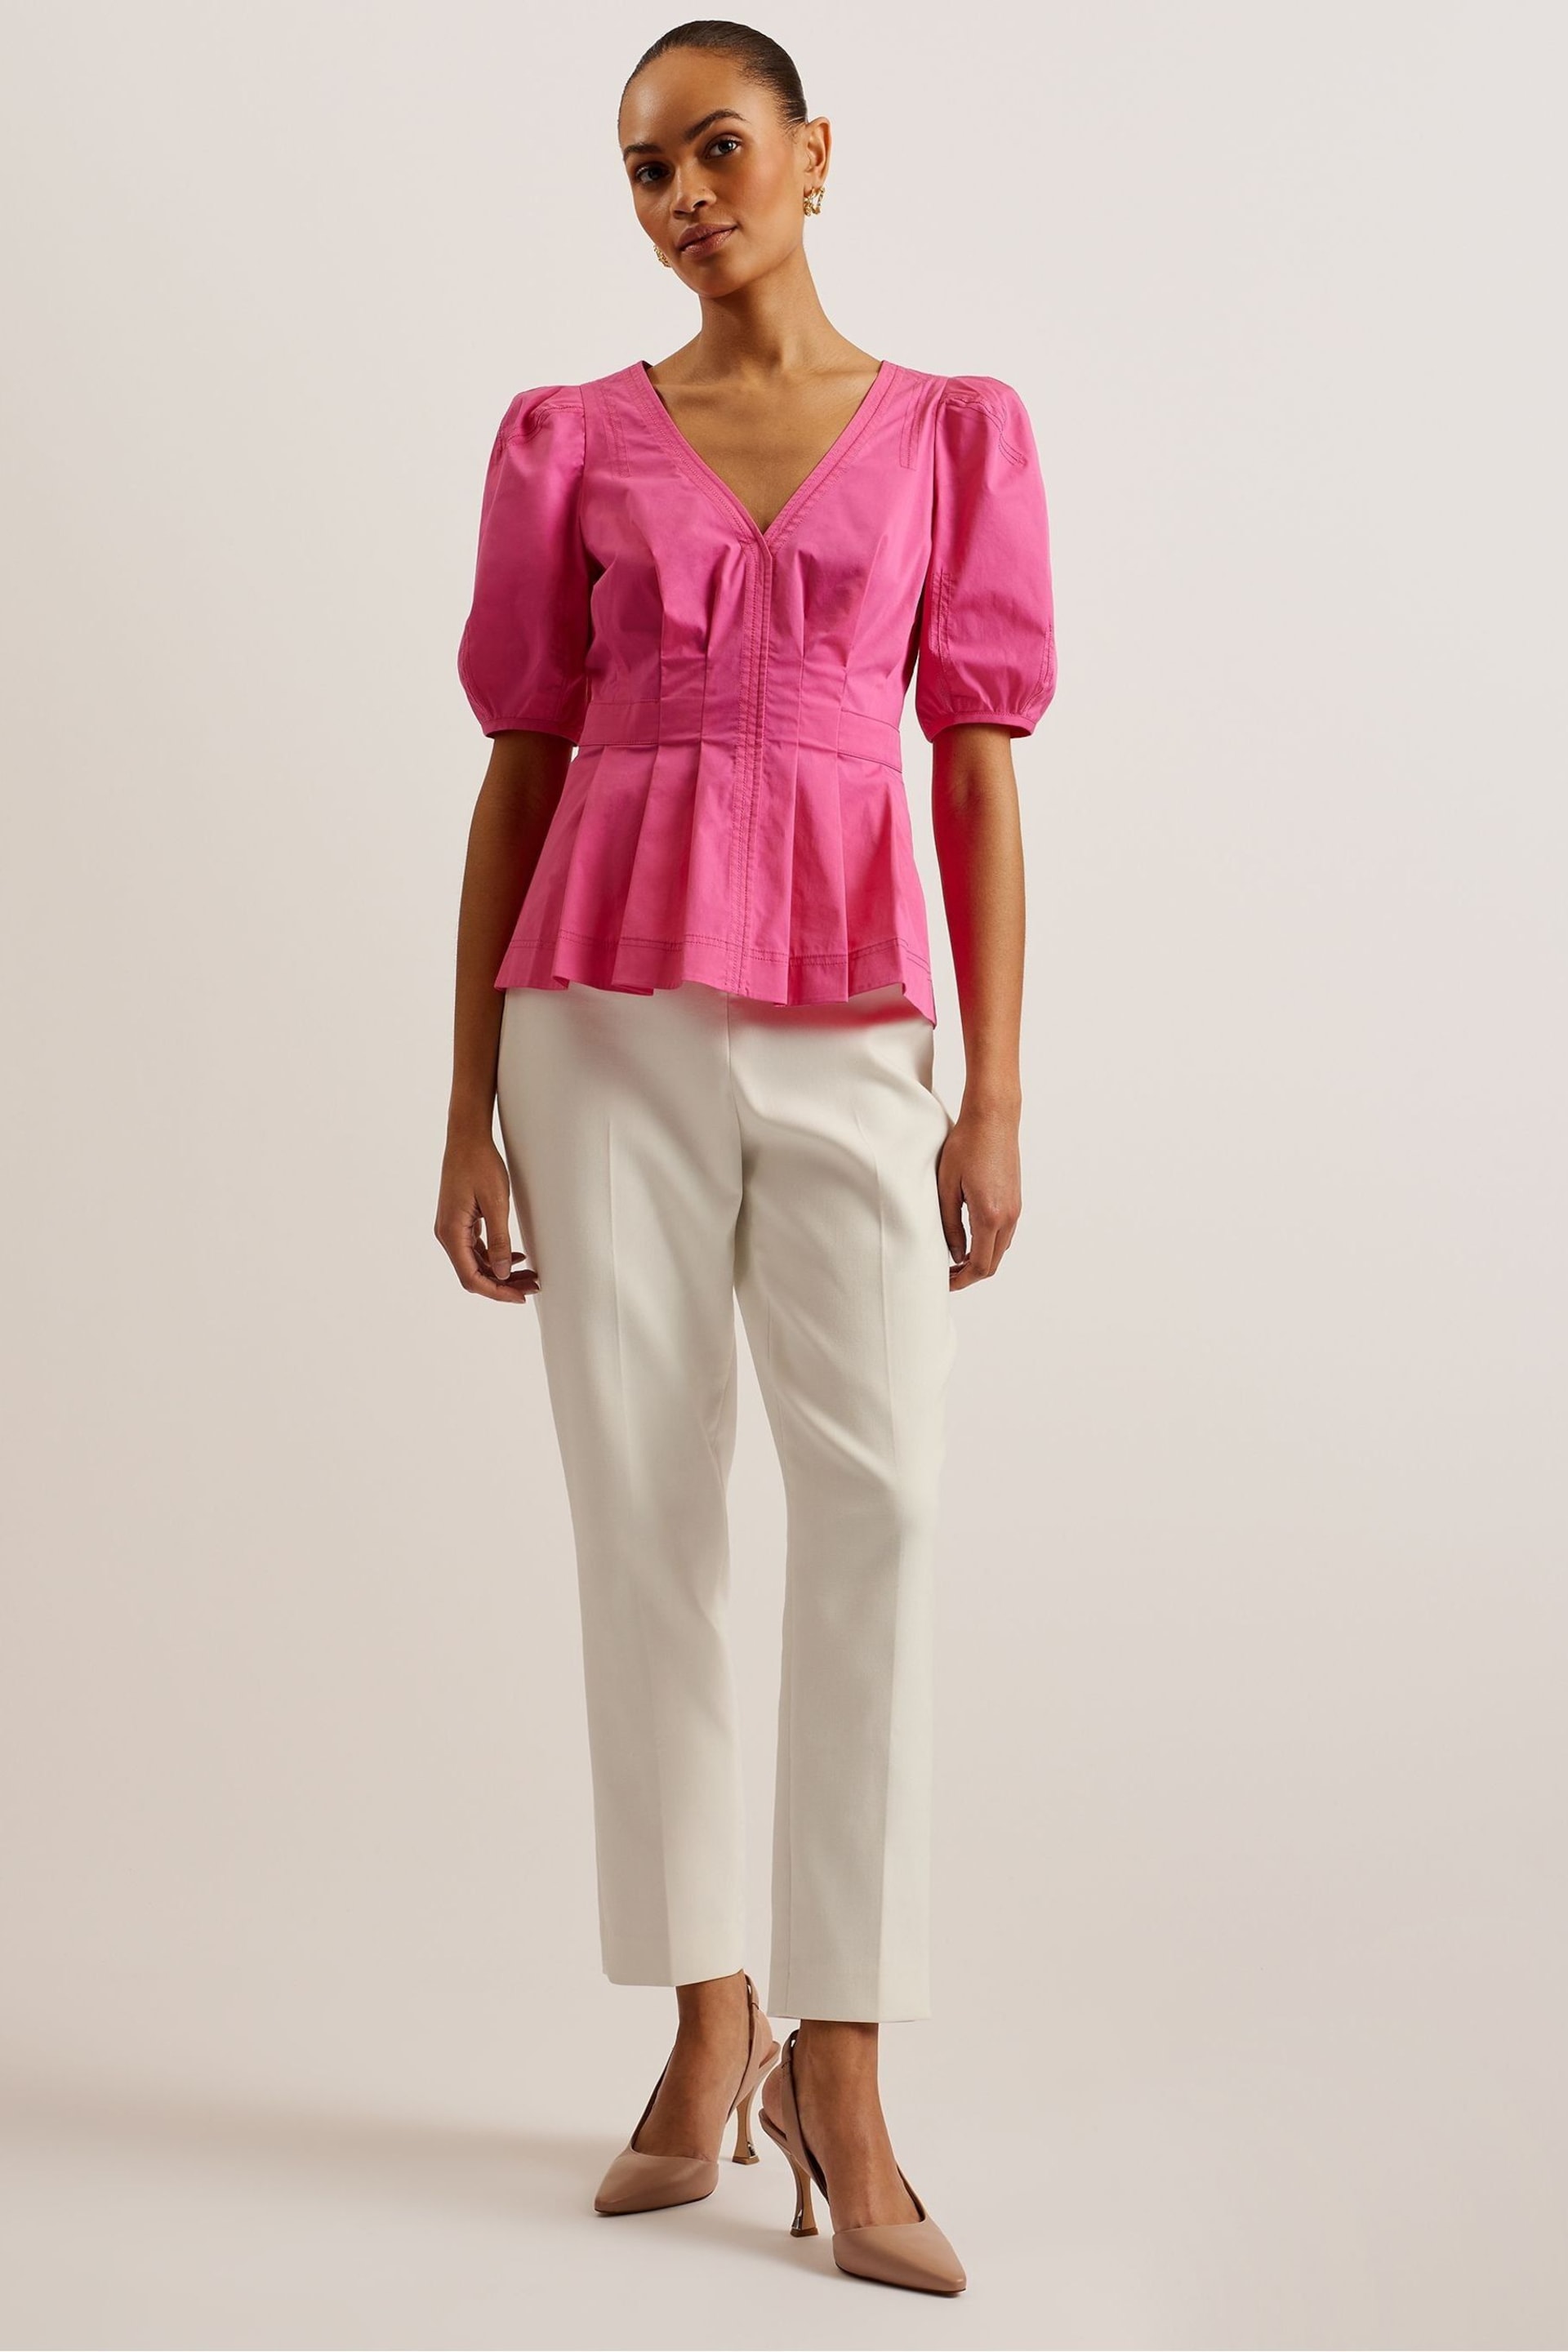 Ted Baker Pink Blouse - Image 1 of 6